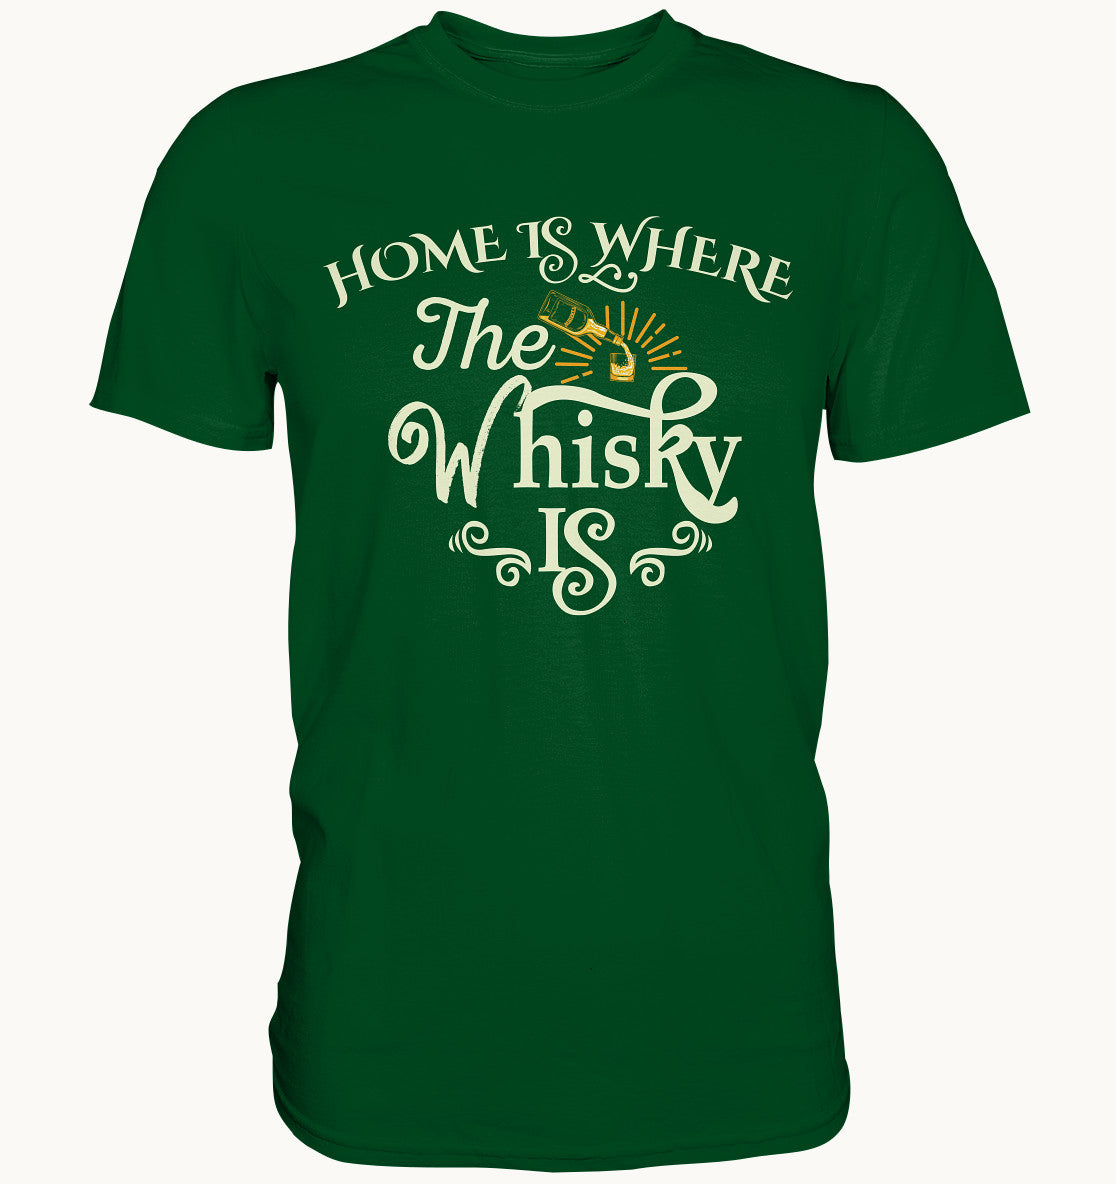 Home is where the Whisky is - Premium Shirt